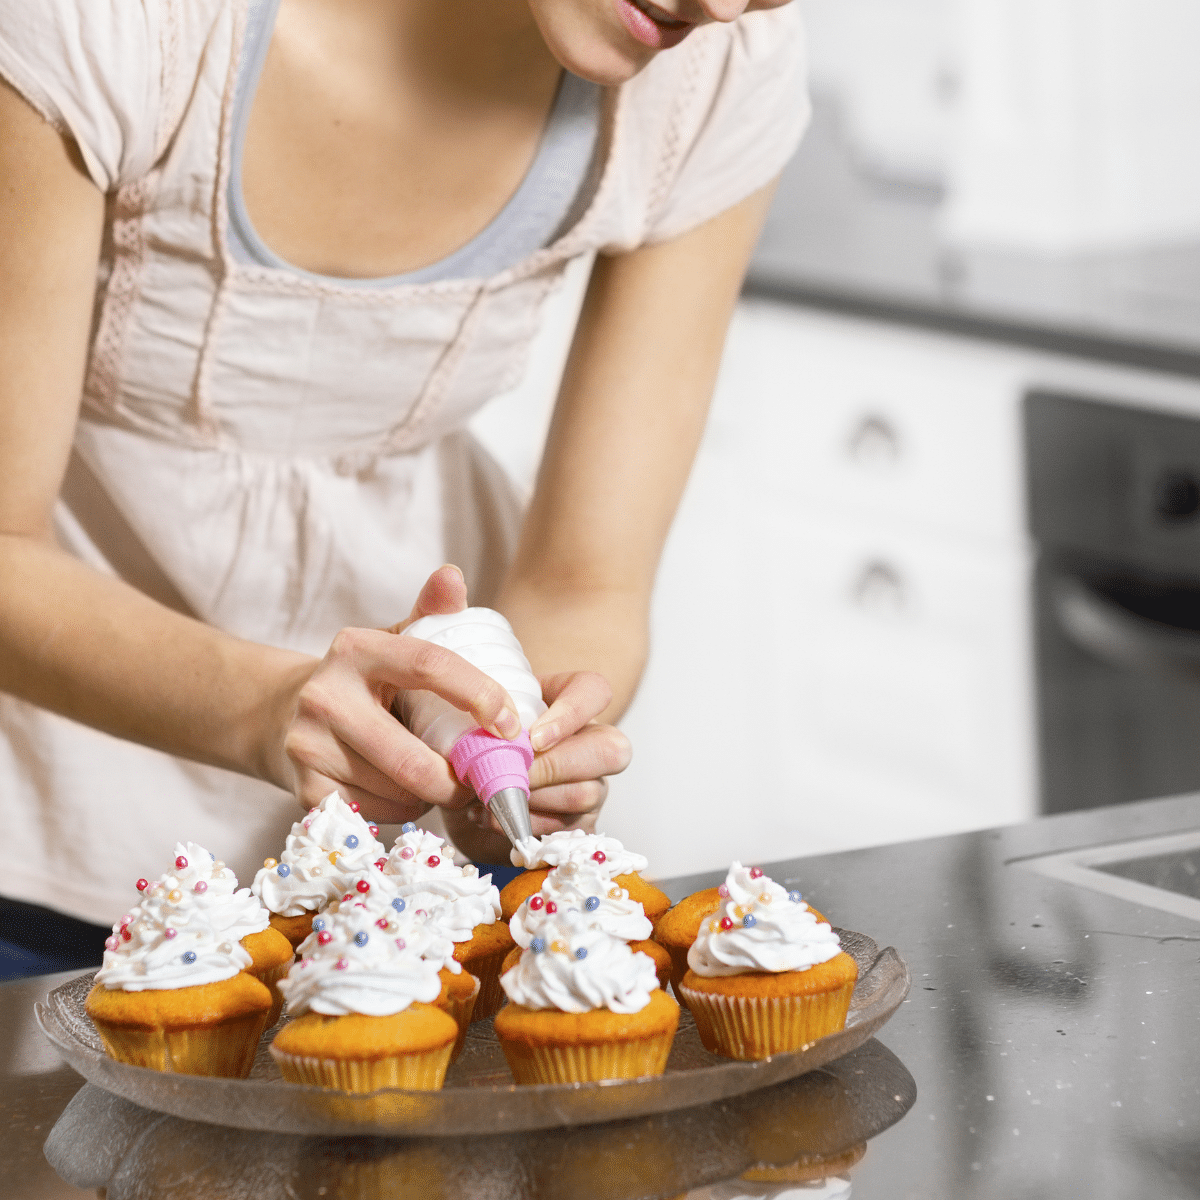 33 Amazon Favorite Gift Ideas for Bakers